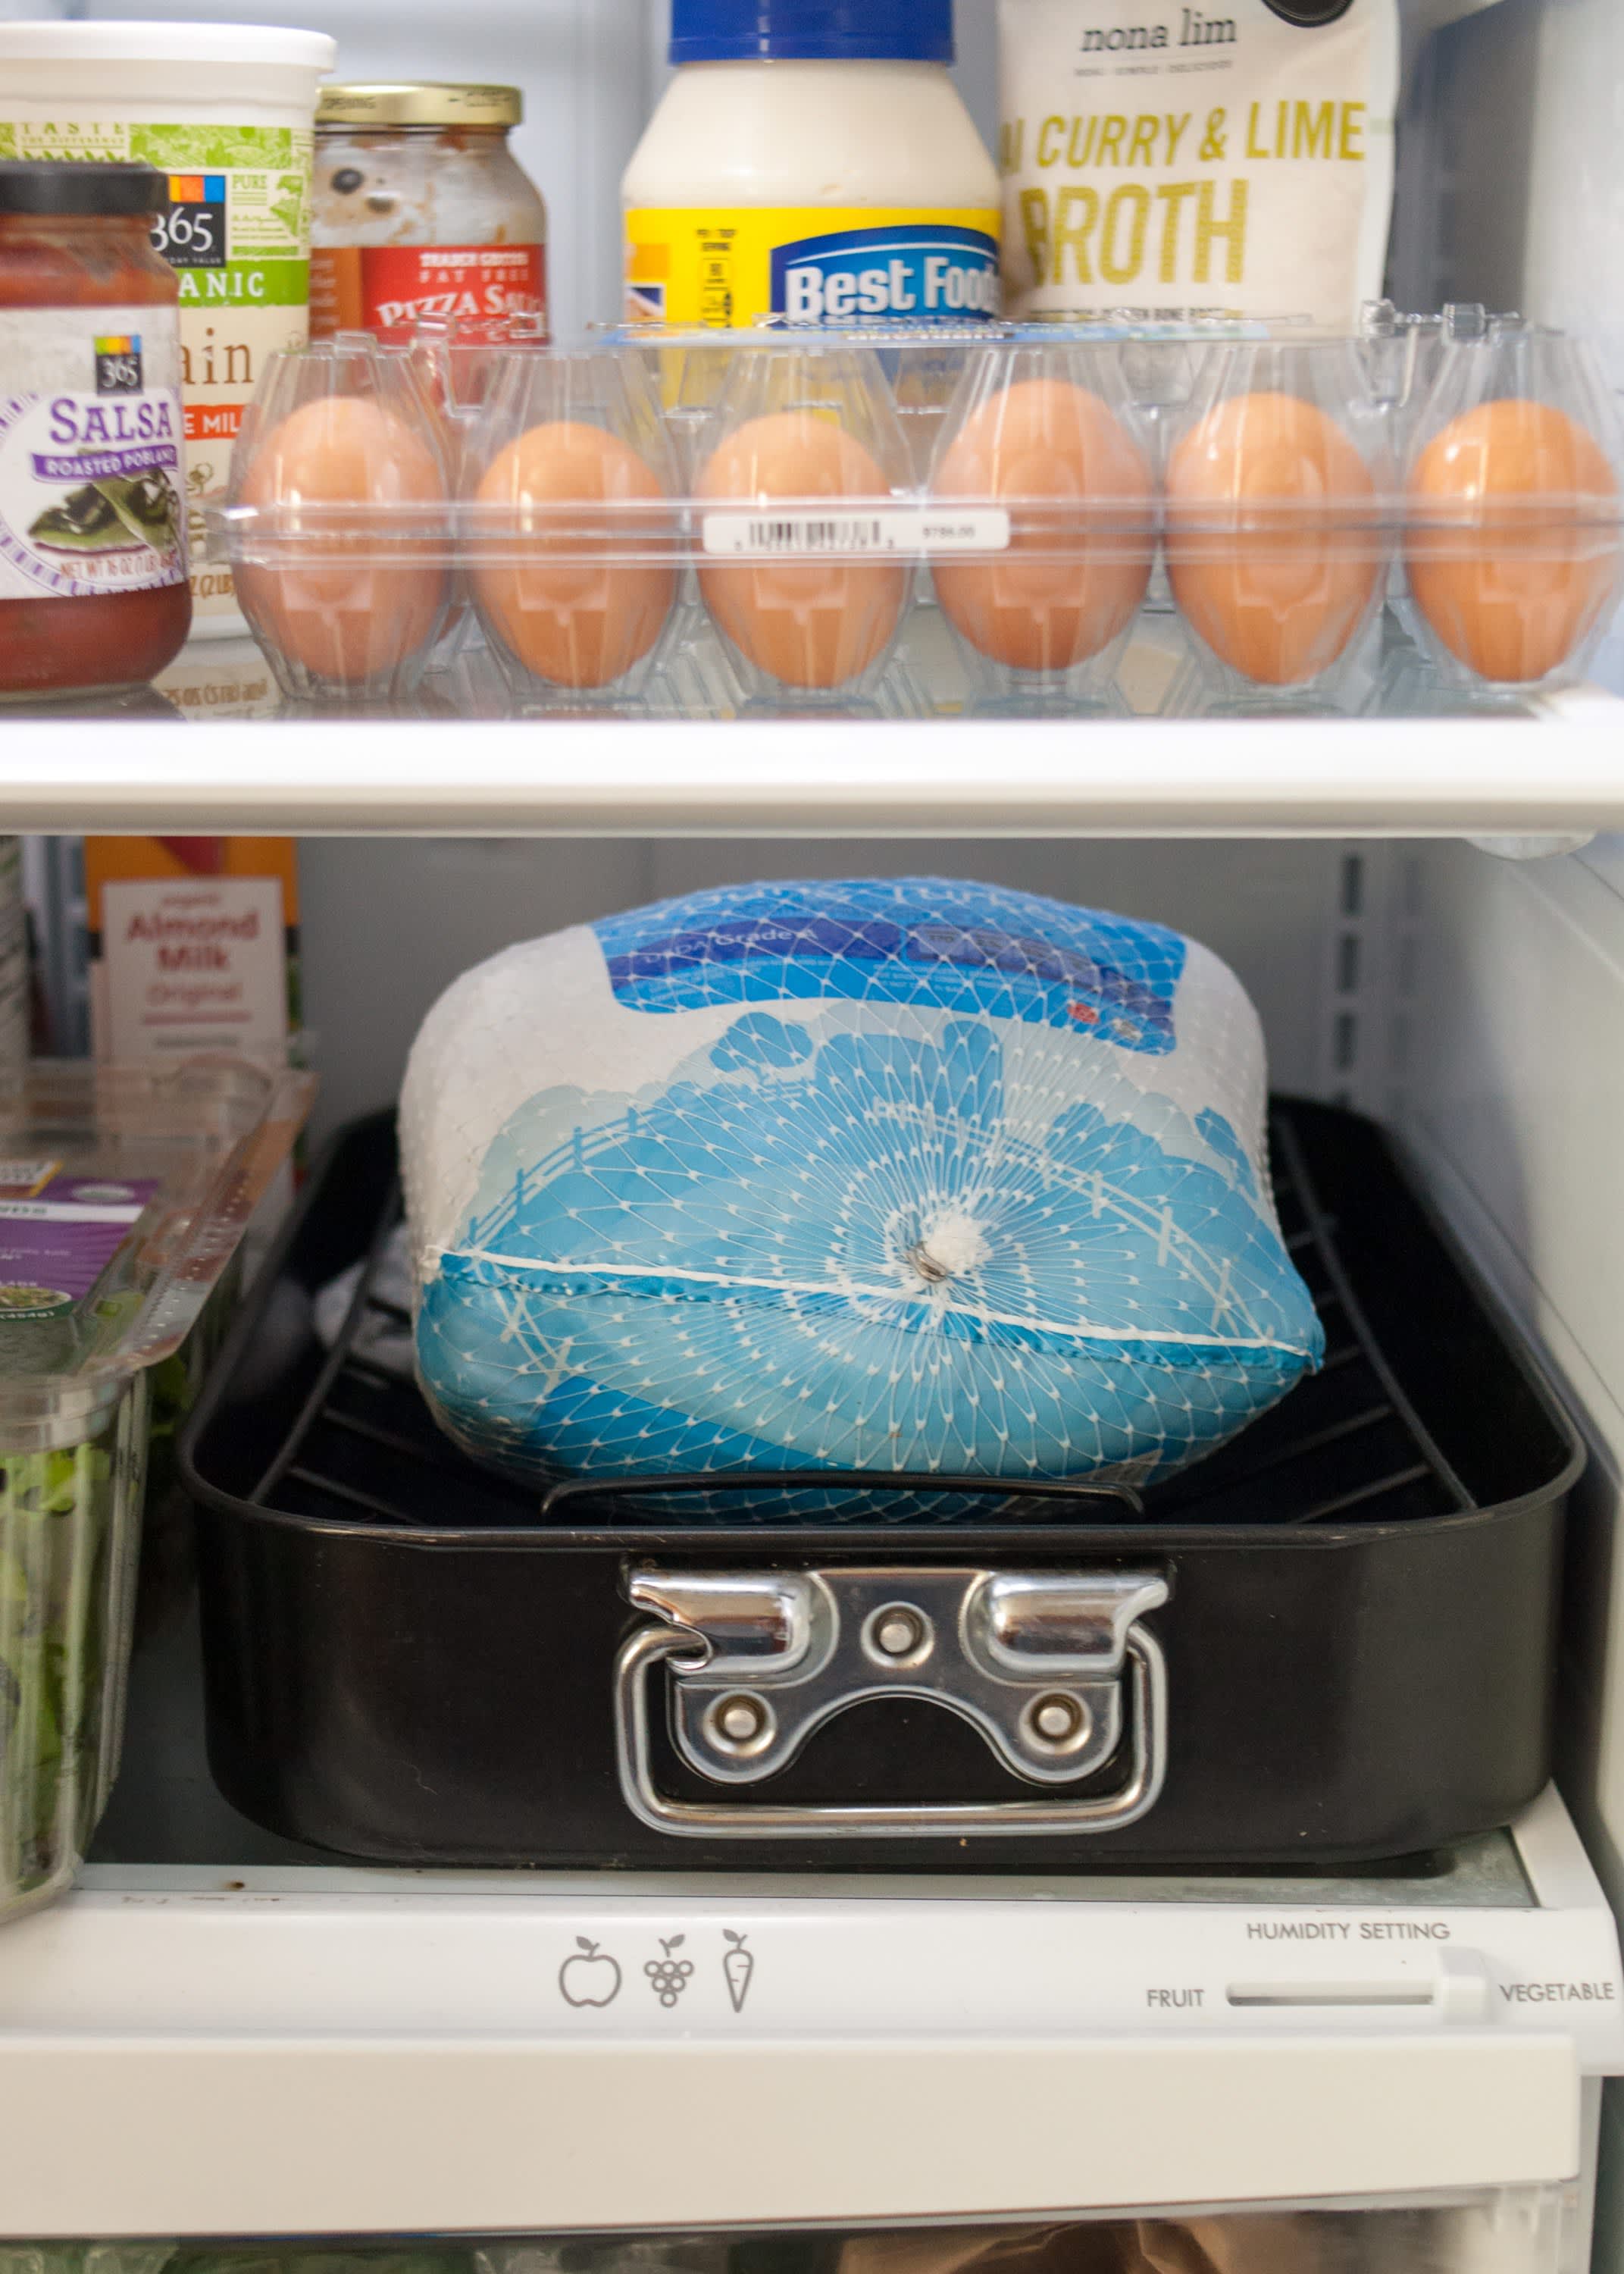 How To Safely Thaw A Frozen Turkey Kitchn,Frying Potatoes In Oil